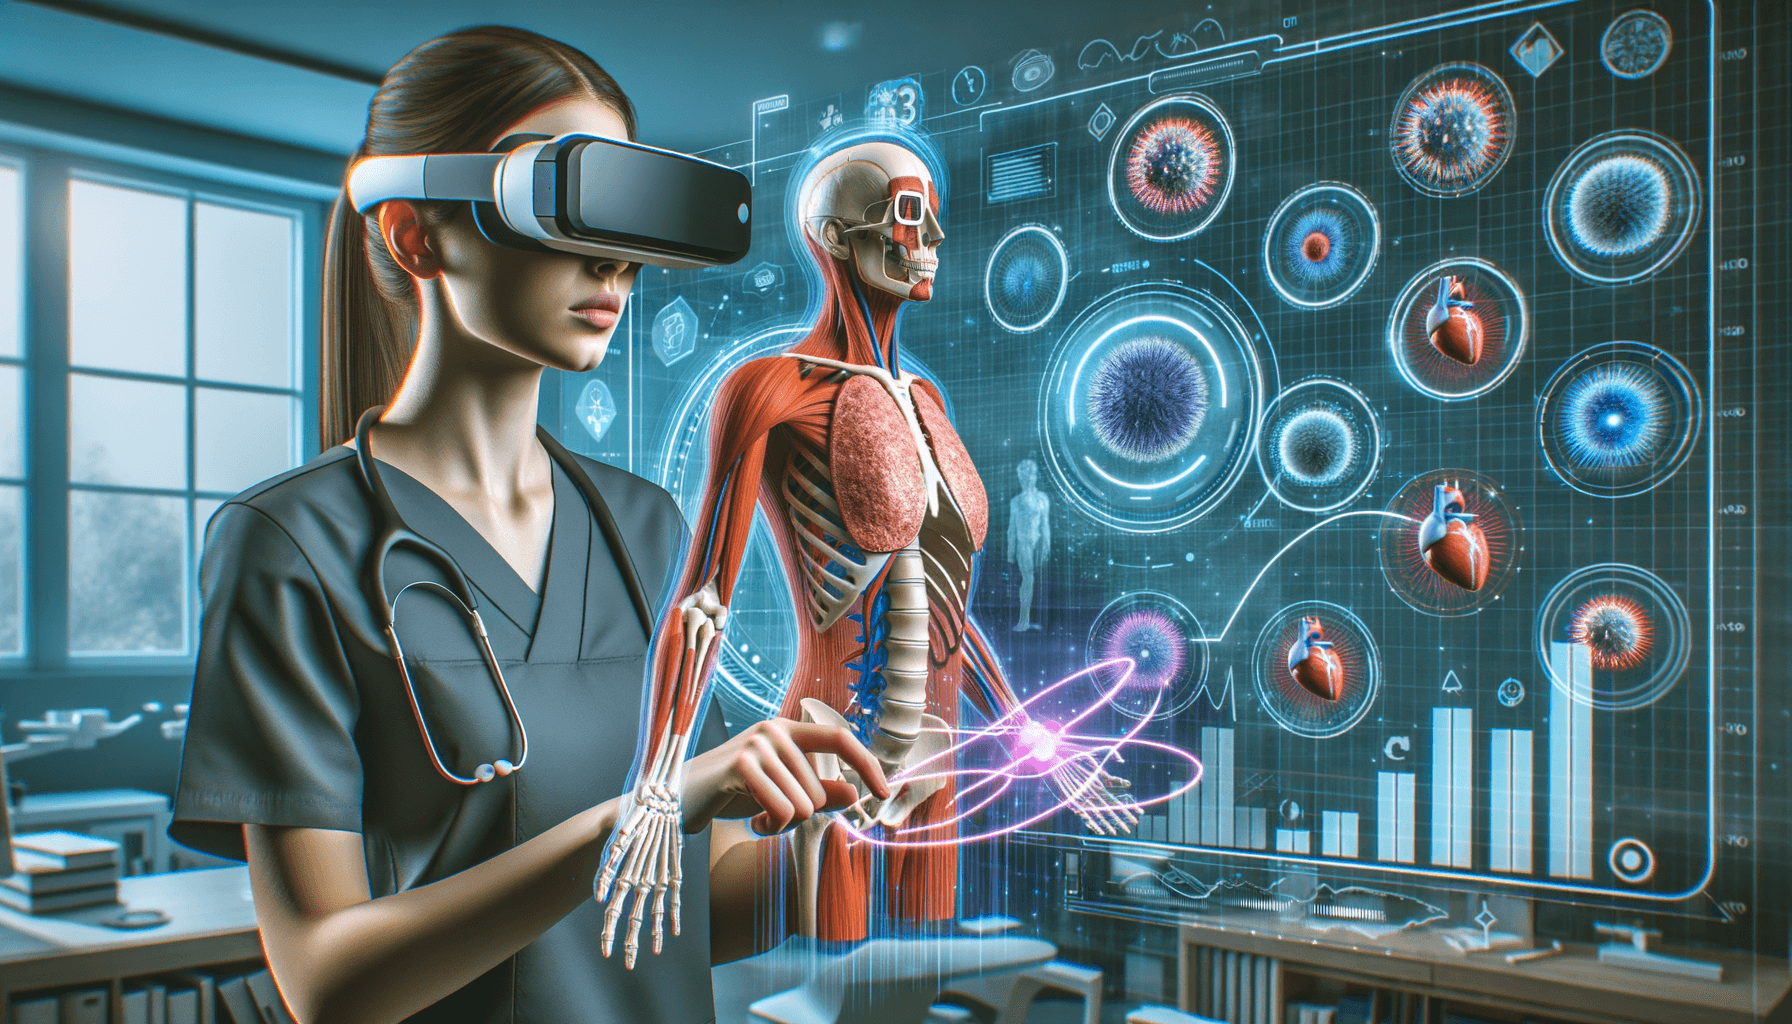 "Discover how Augmented Reality by Gravity Jack takes healthcare training to the next level - Innovative AR solutions transforming medical education and surgical assistance for a smarter future. #HealthcareTech #AugmentedReality #MedicalInnovation"